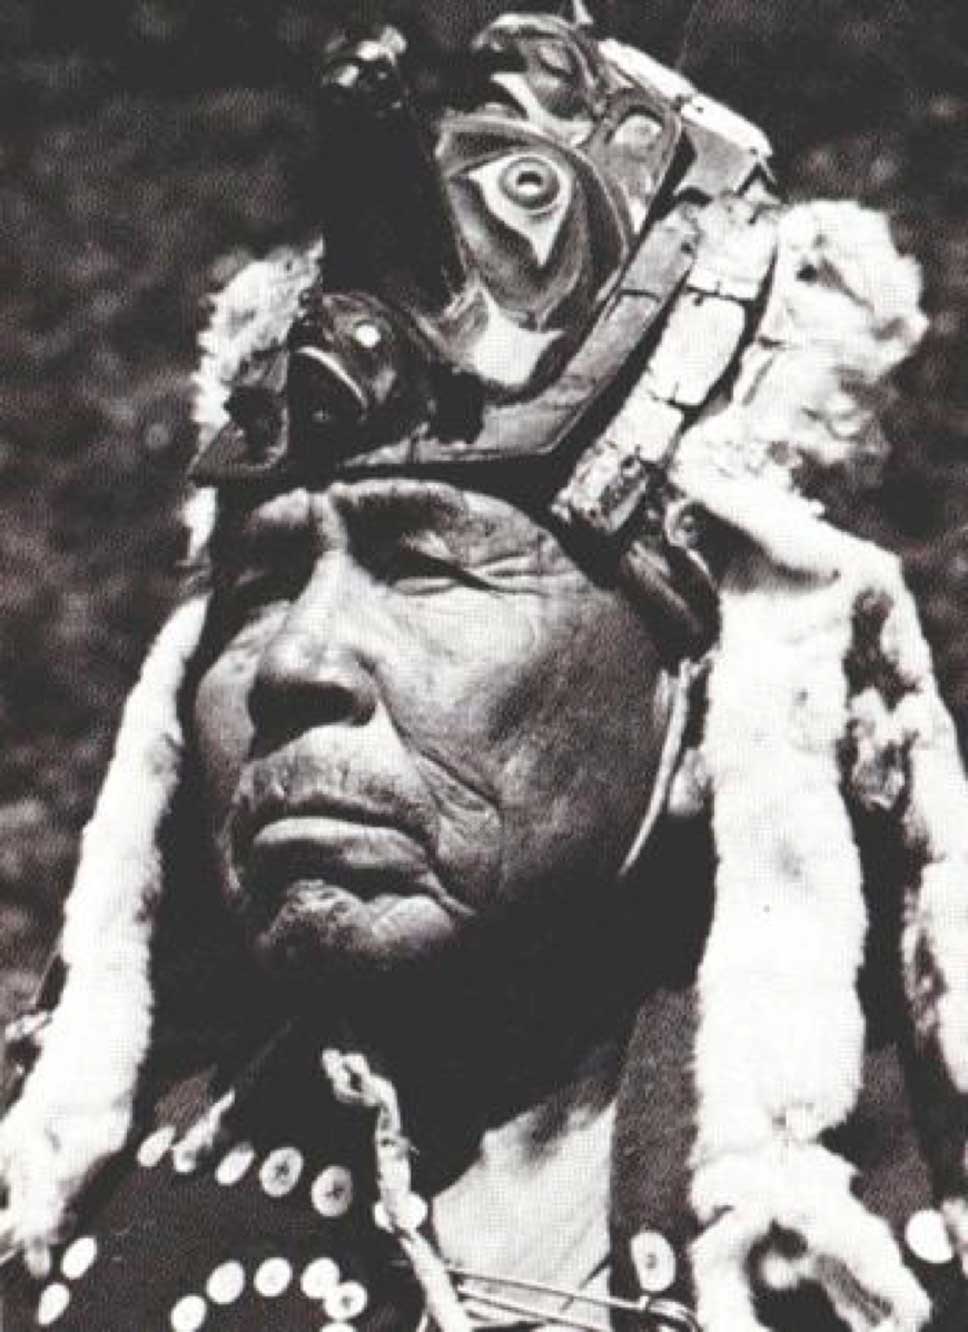 Black and white portrait photograph of Hiłamas, Willie Seaweed shown wearing a chief's headdress with ermine trim